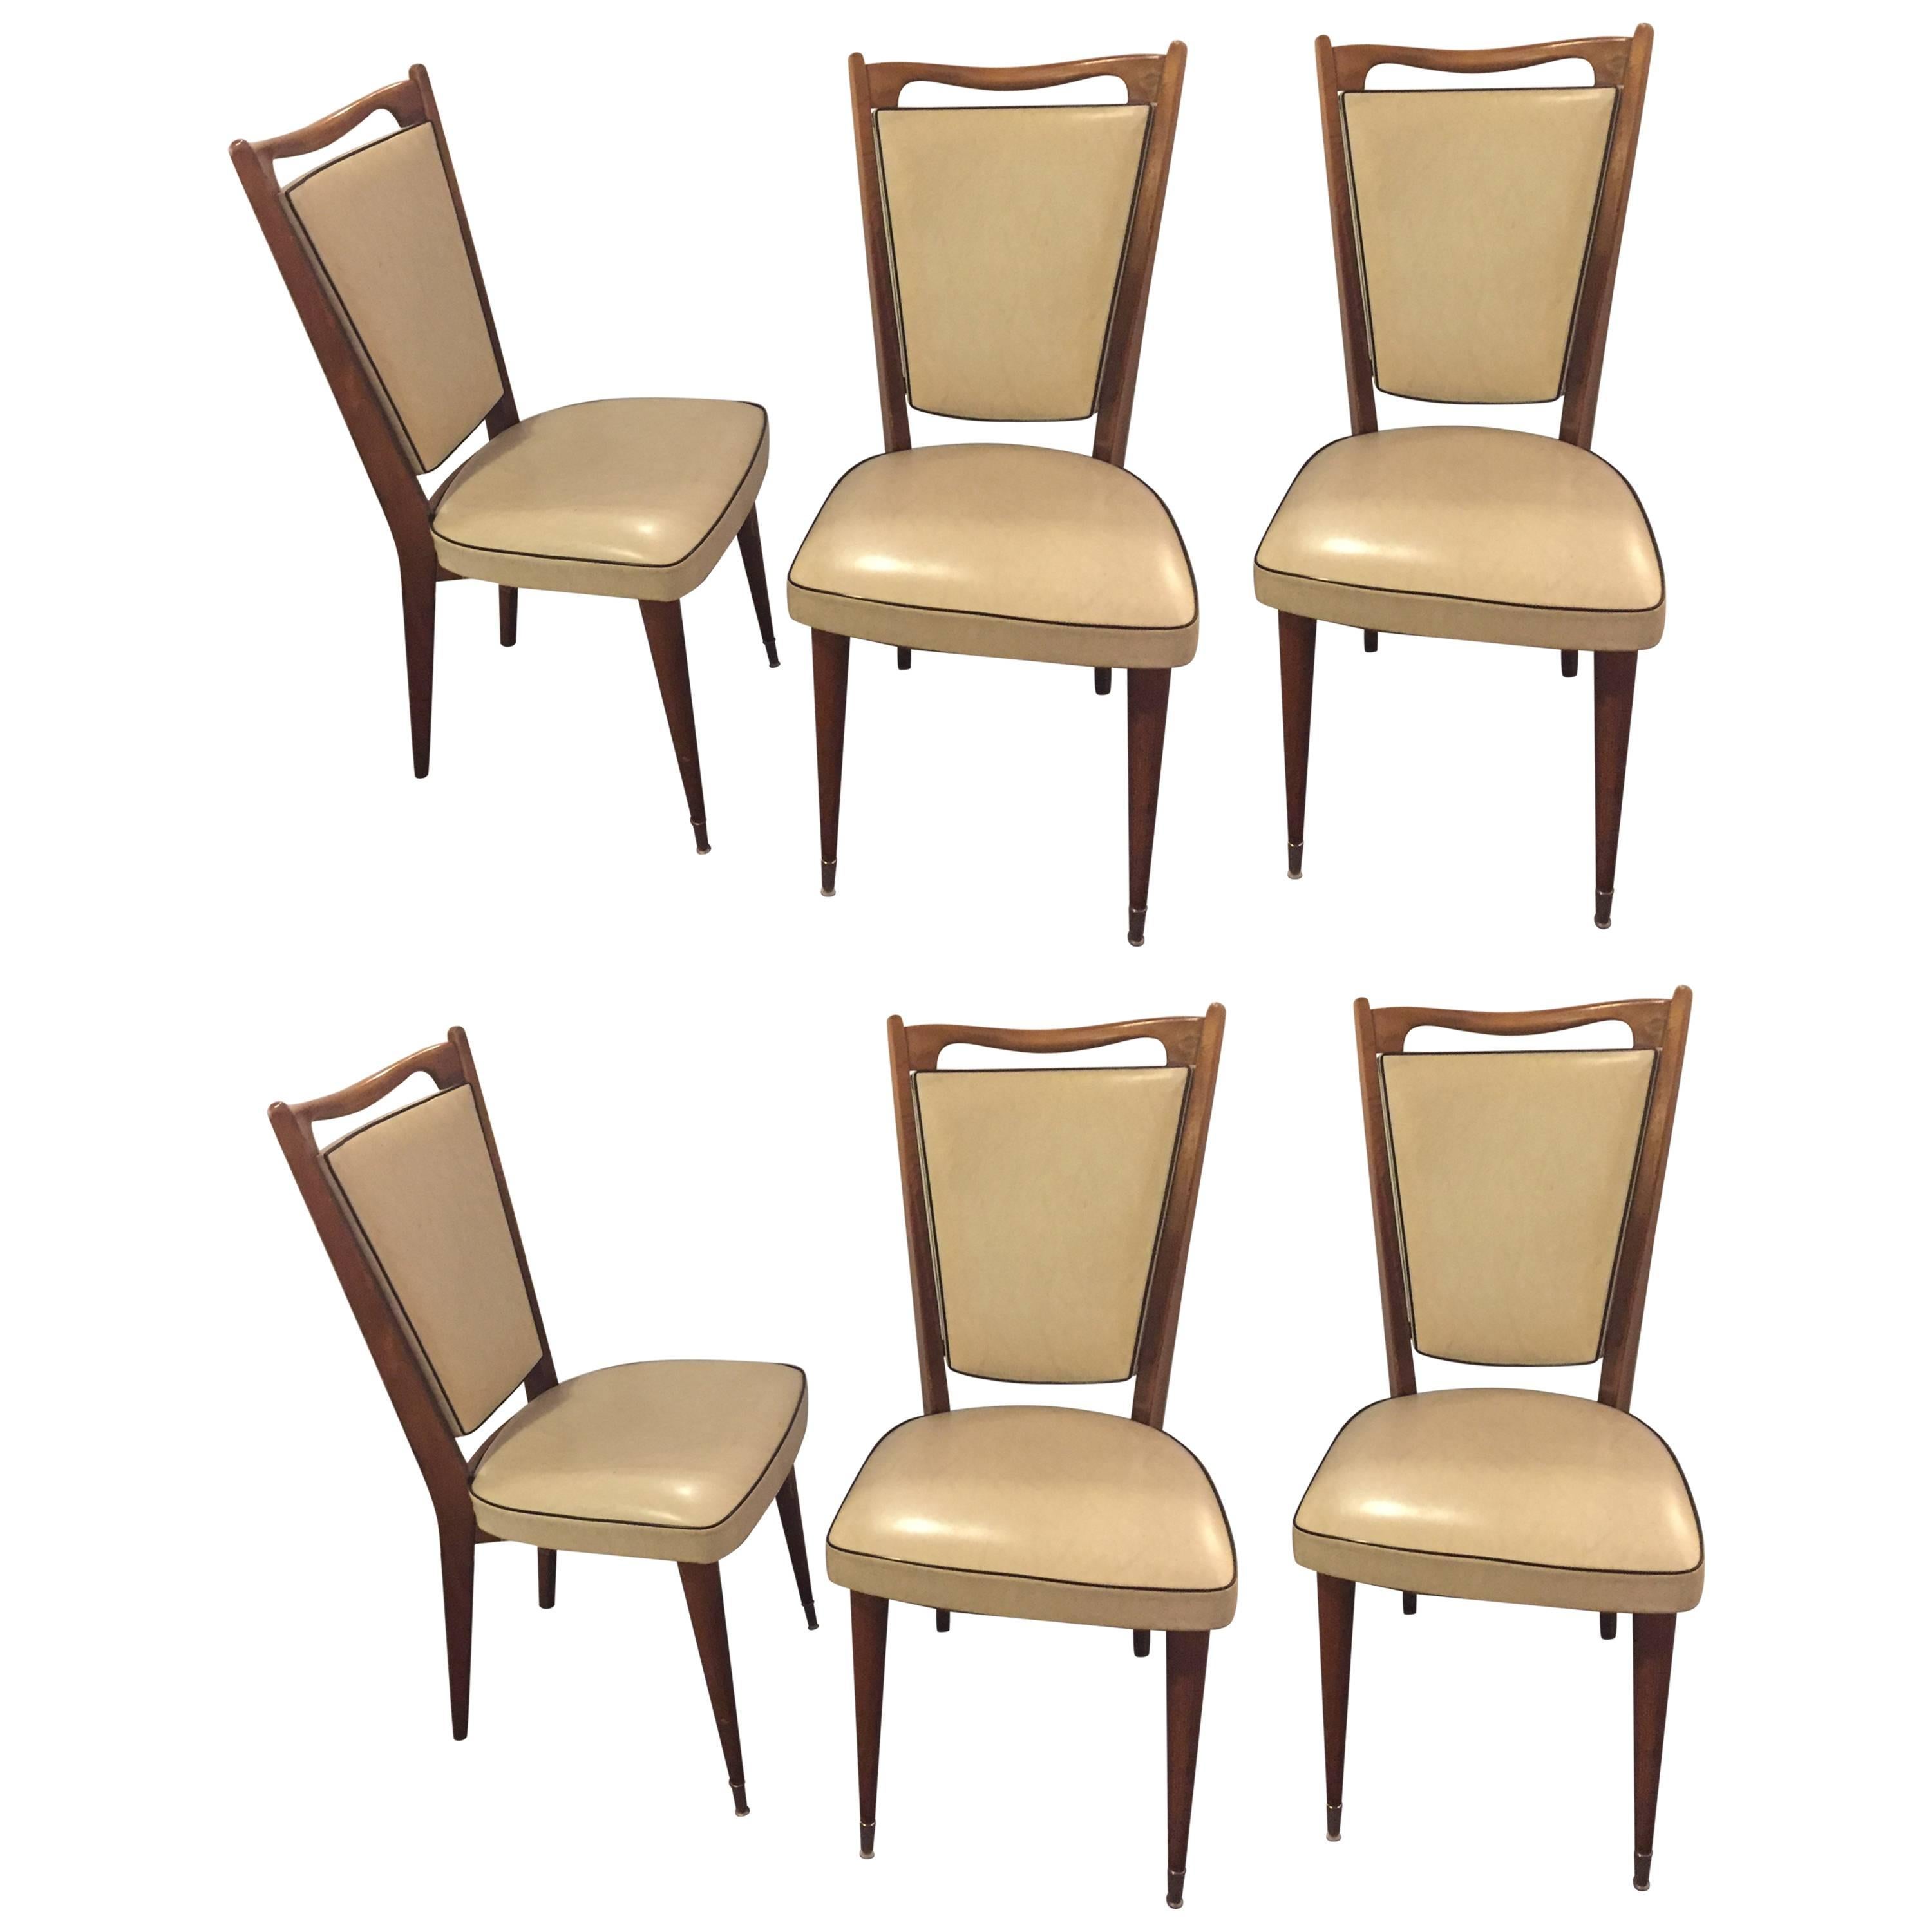 Set of Six Mid-Century Modern Gio Ponti Style Dining Chairs High V-Shaped Backs